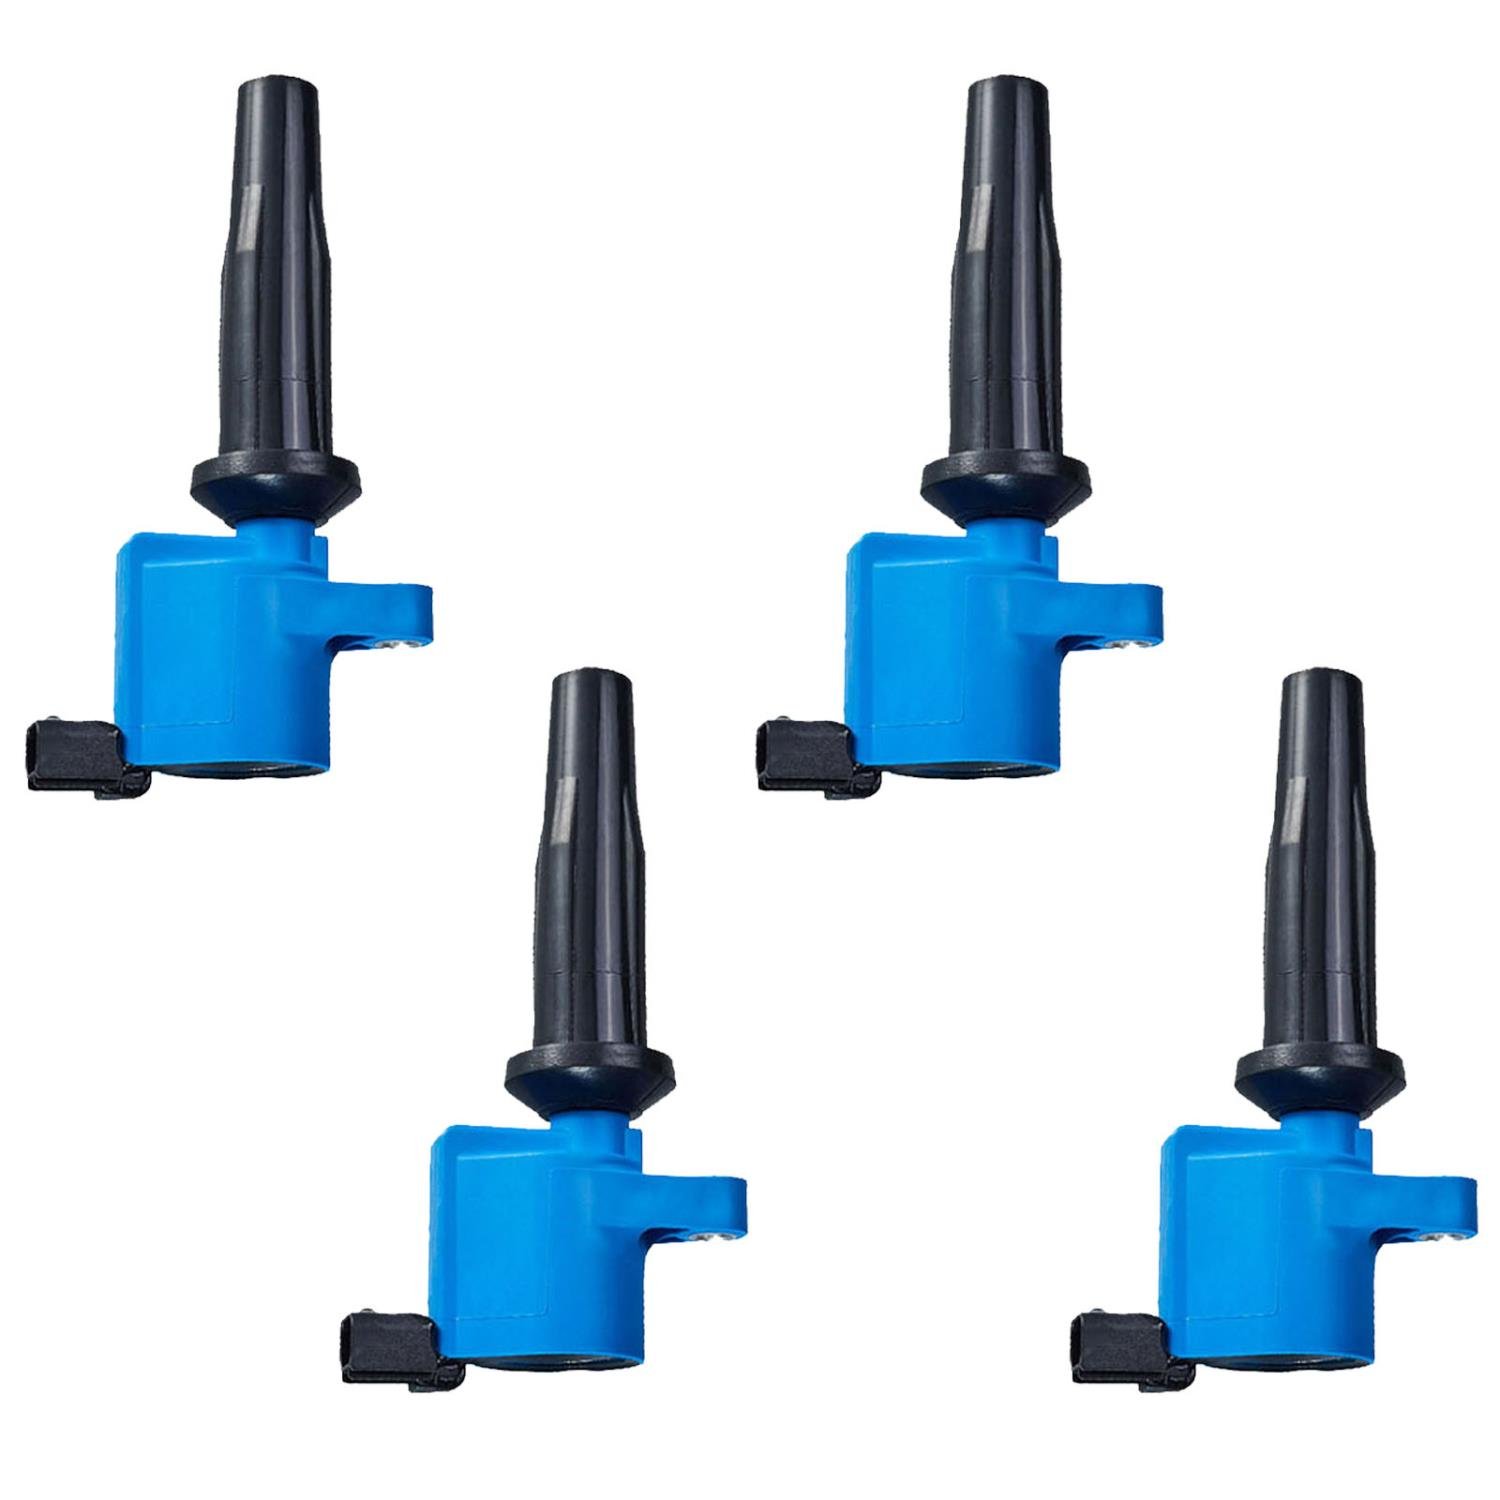 High-Performance Ignition Coils for Ford/Mazda Transit/Focus 2.0L/2.3L [Blue]